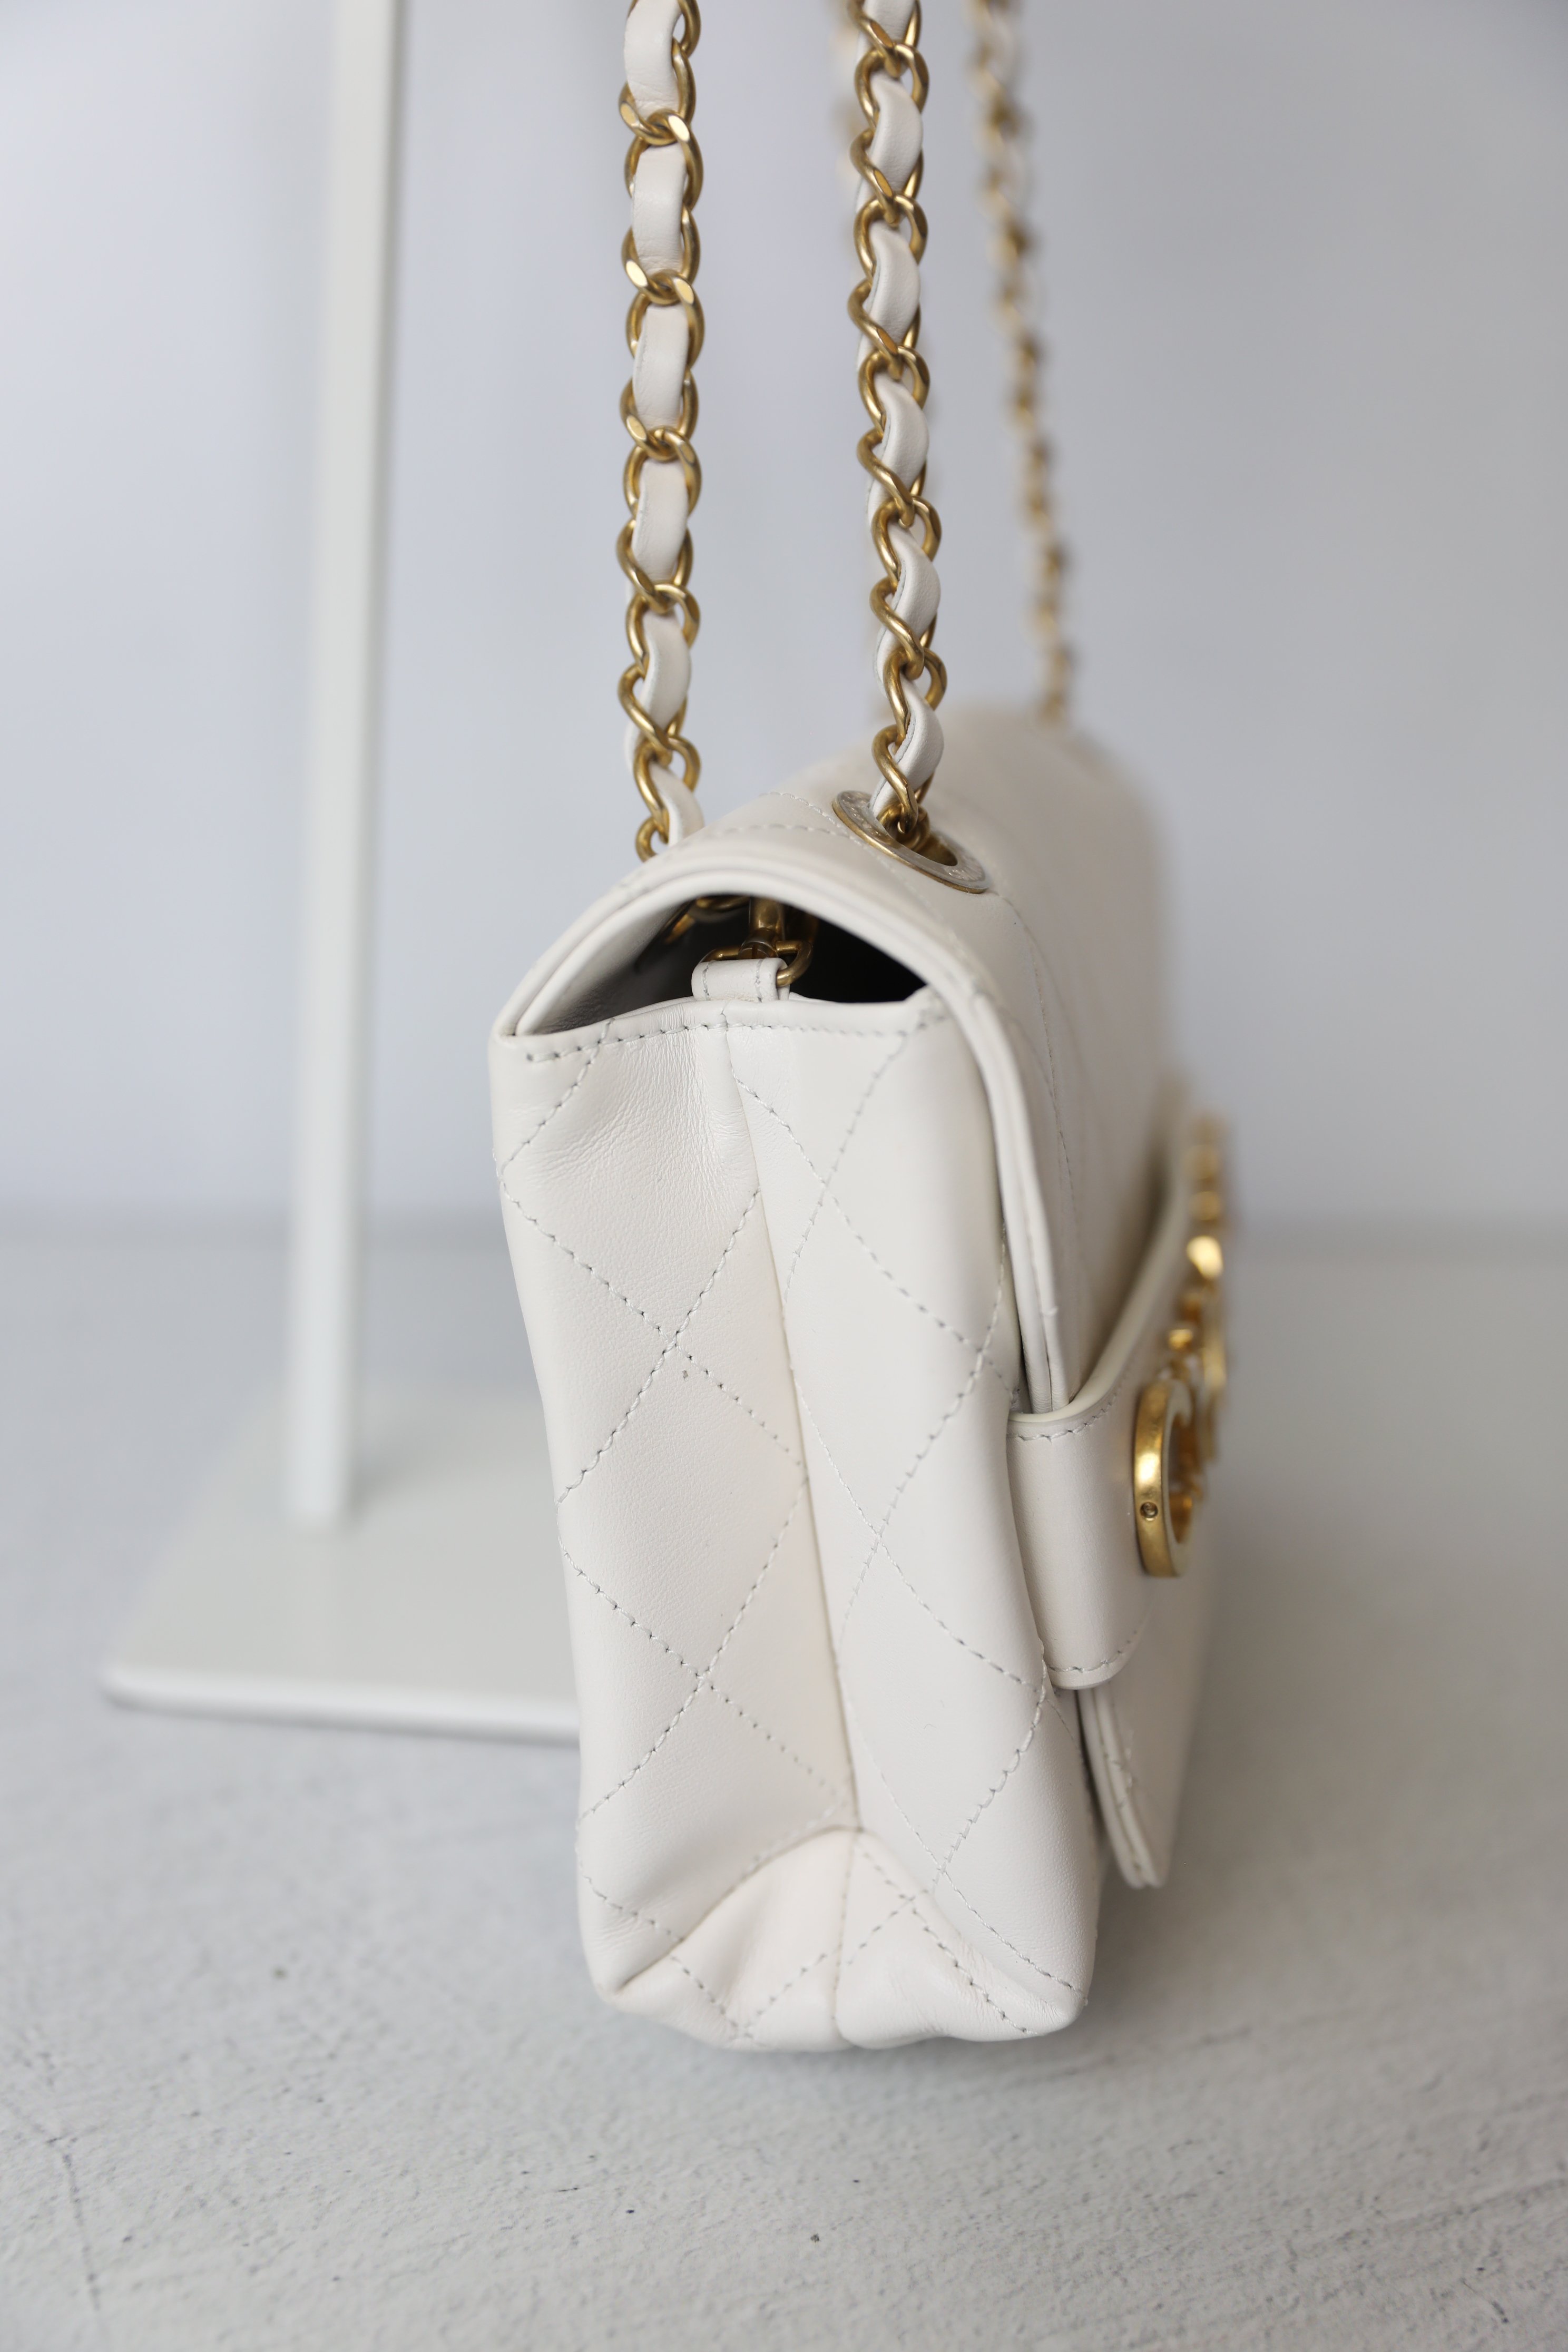 Louis Vuitton New Wave Flap, White with Gold Hardware, Preowned in Dustbag  WA001 - Julia Rose Boston